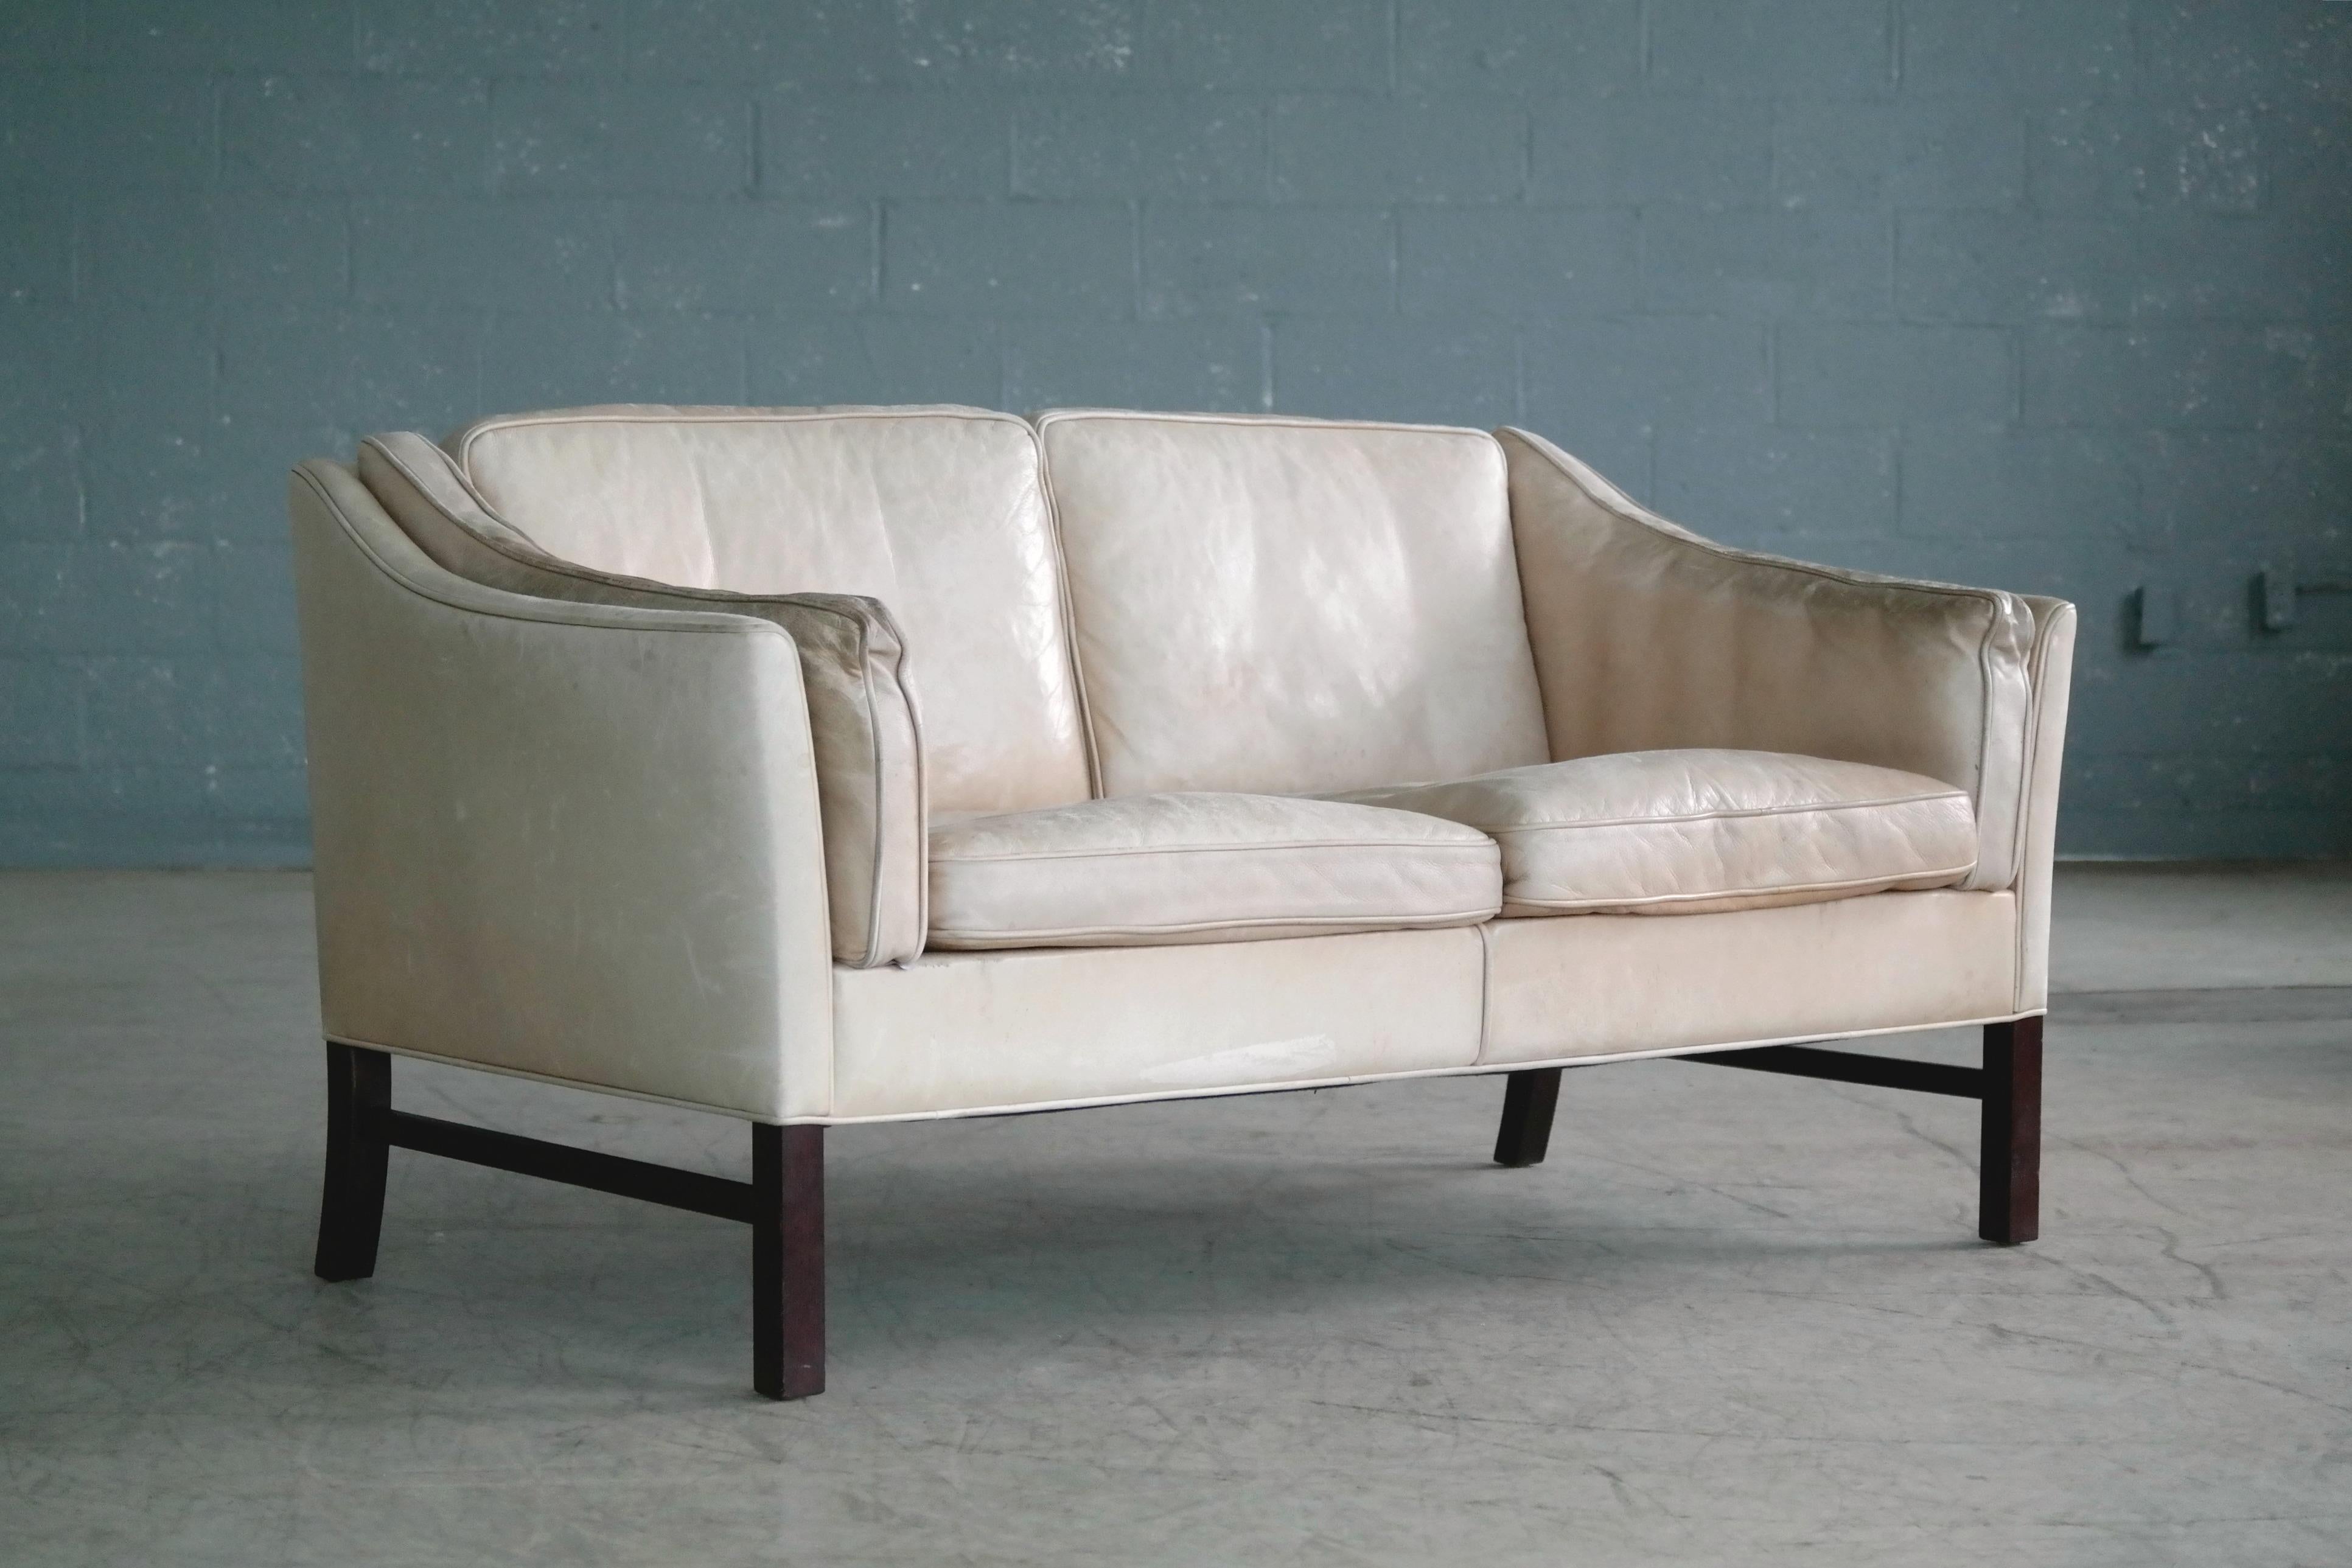 Great loveseat or two-seat sofa attributed to Illum Wikkelso made by Grandt Mobler of Denmark sometime in the 1970s. High quality construction with a slightly scalloped back with semi-down filled cushions covered in a nice tan top grain leather that